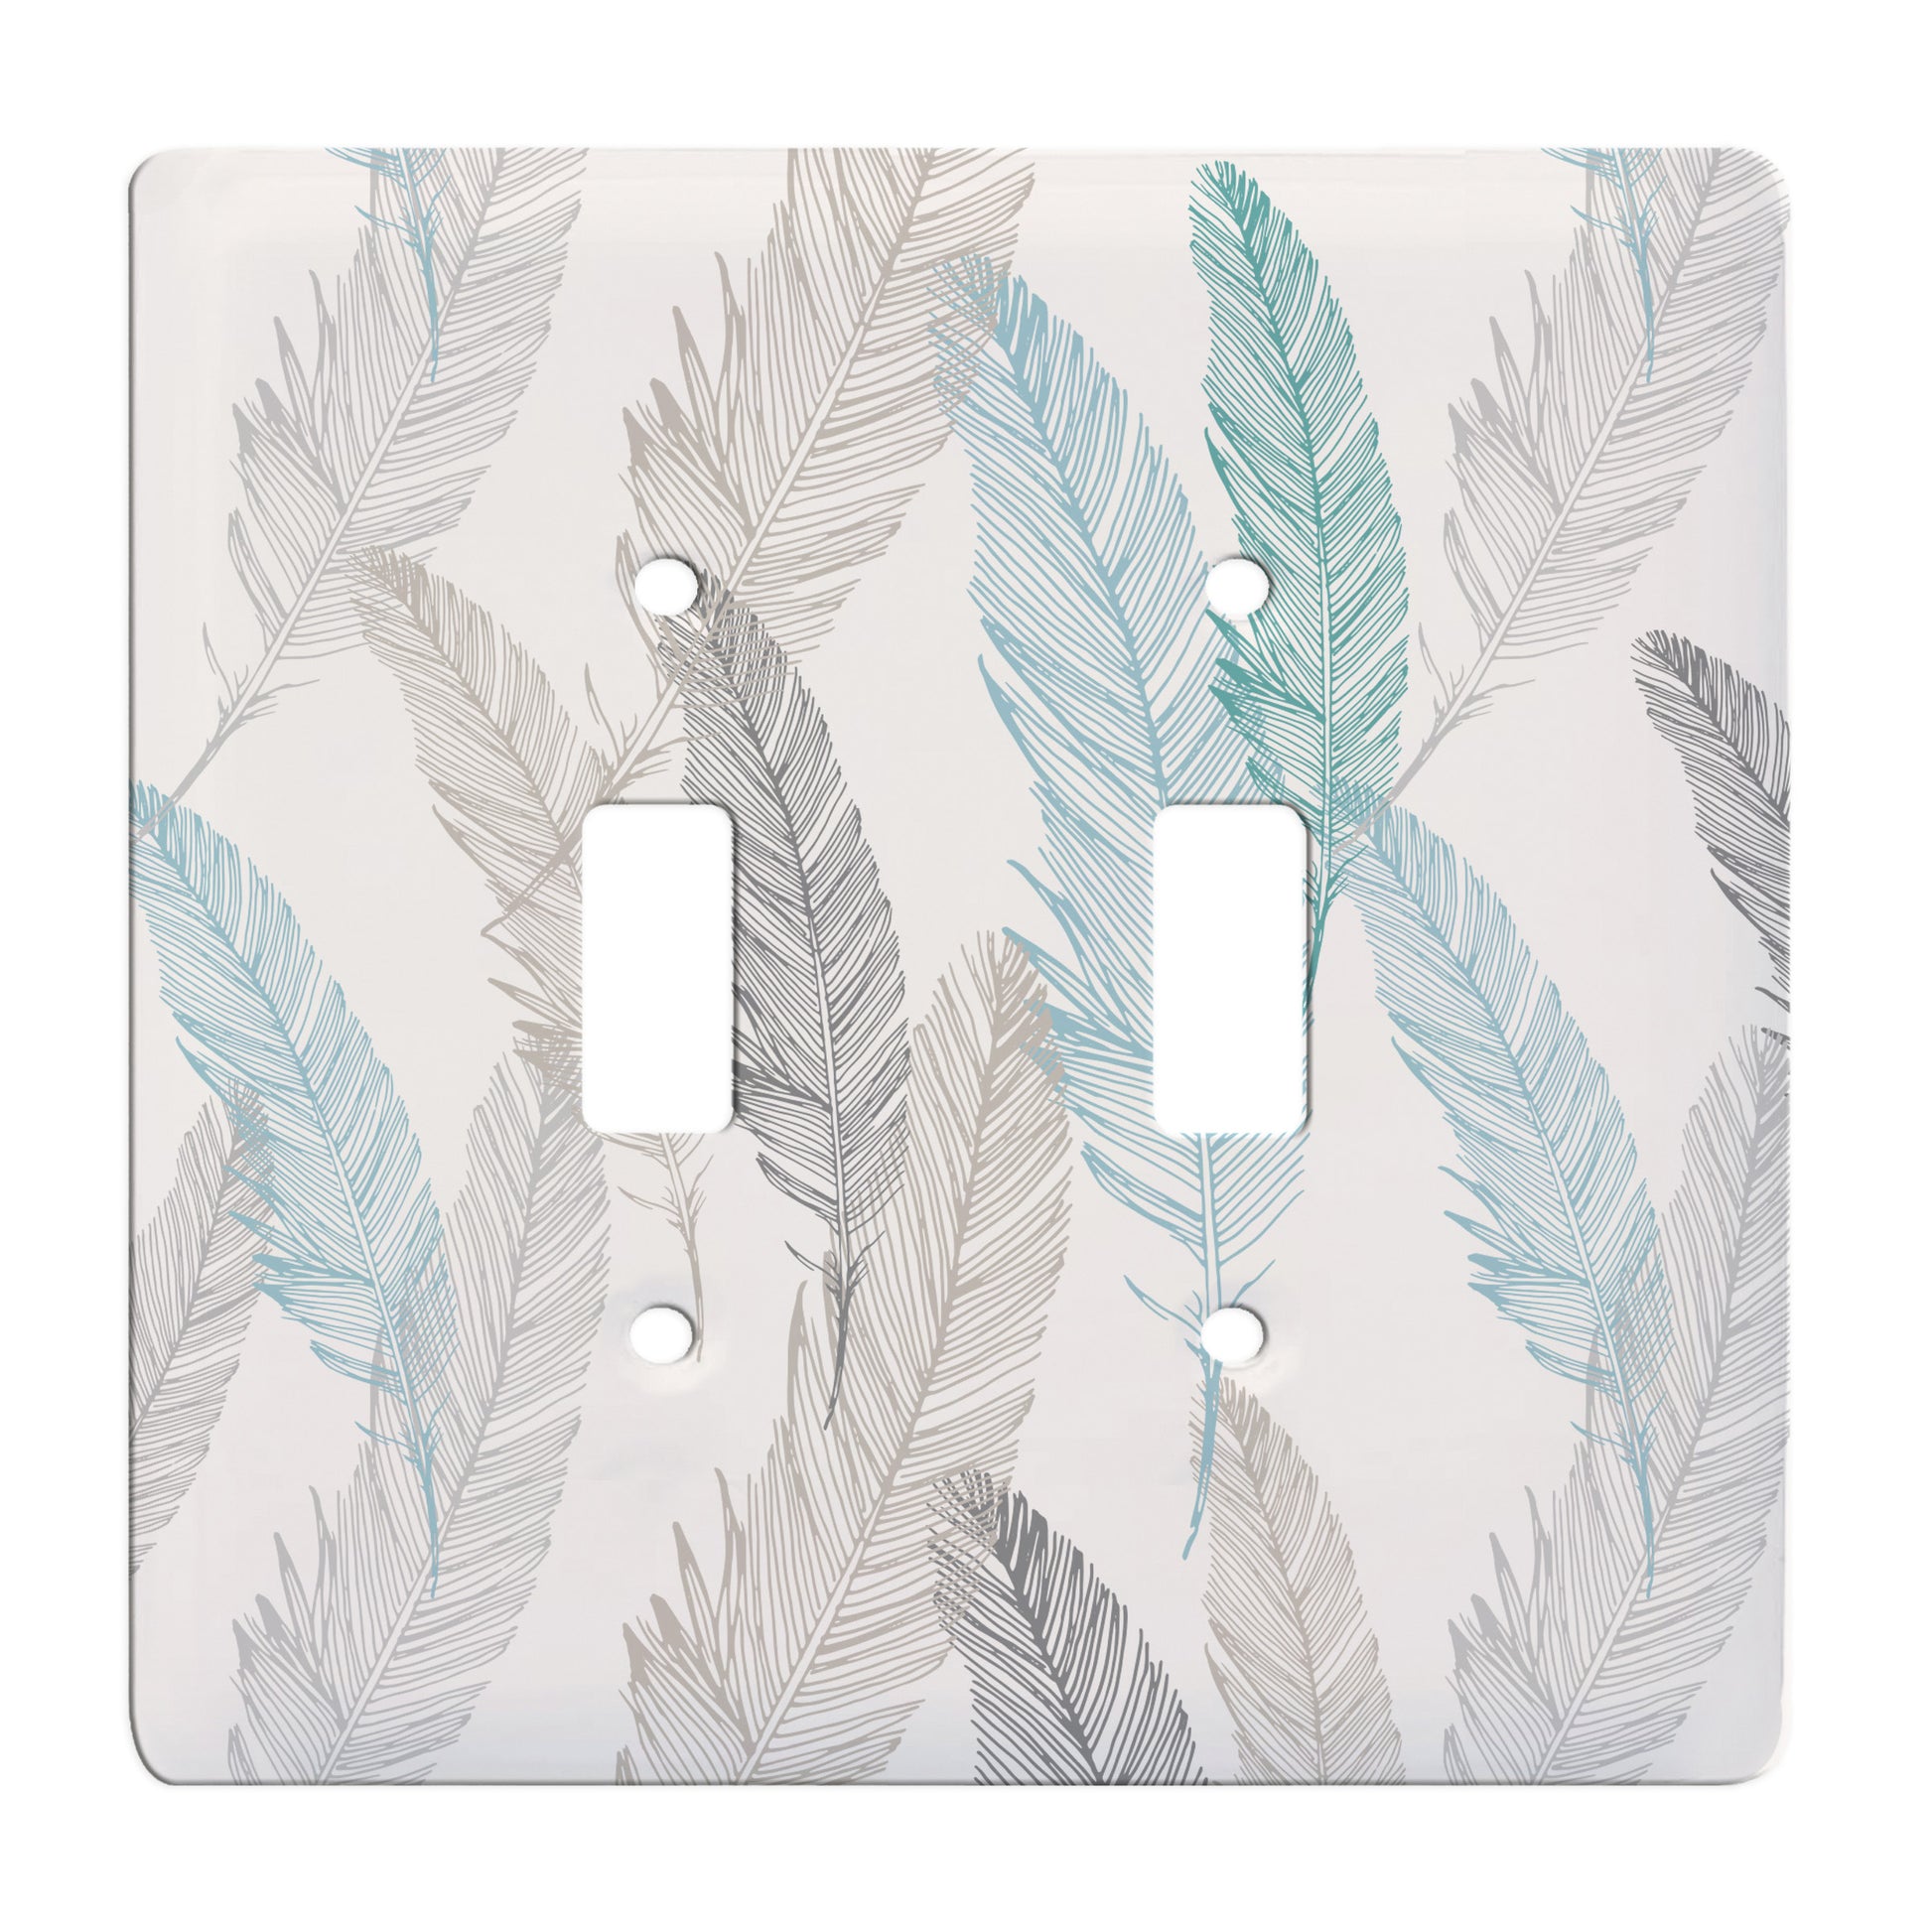 white ceramic double toggle switch plate featuring pattern of overlapping gray and blue feathers.